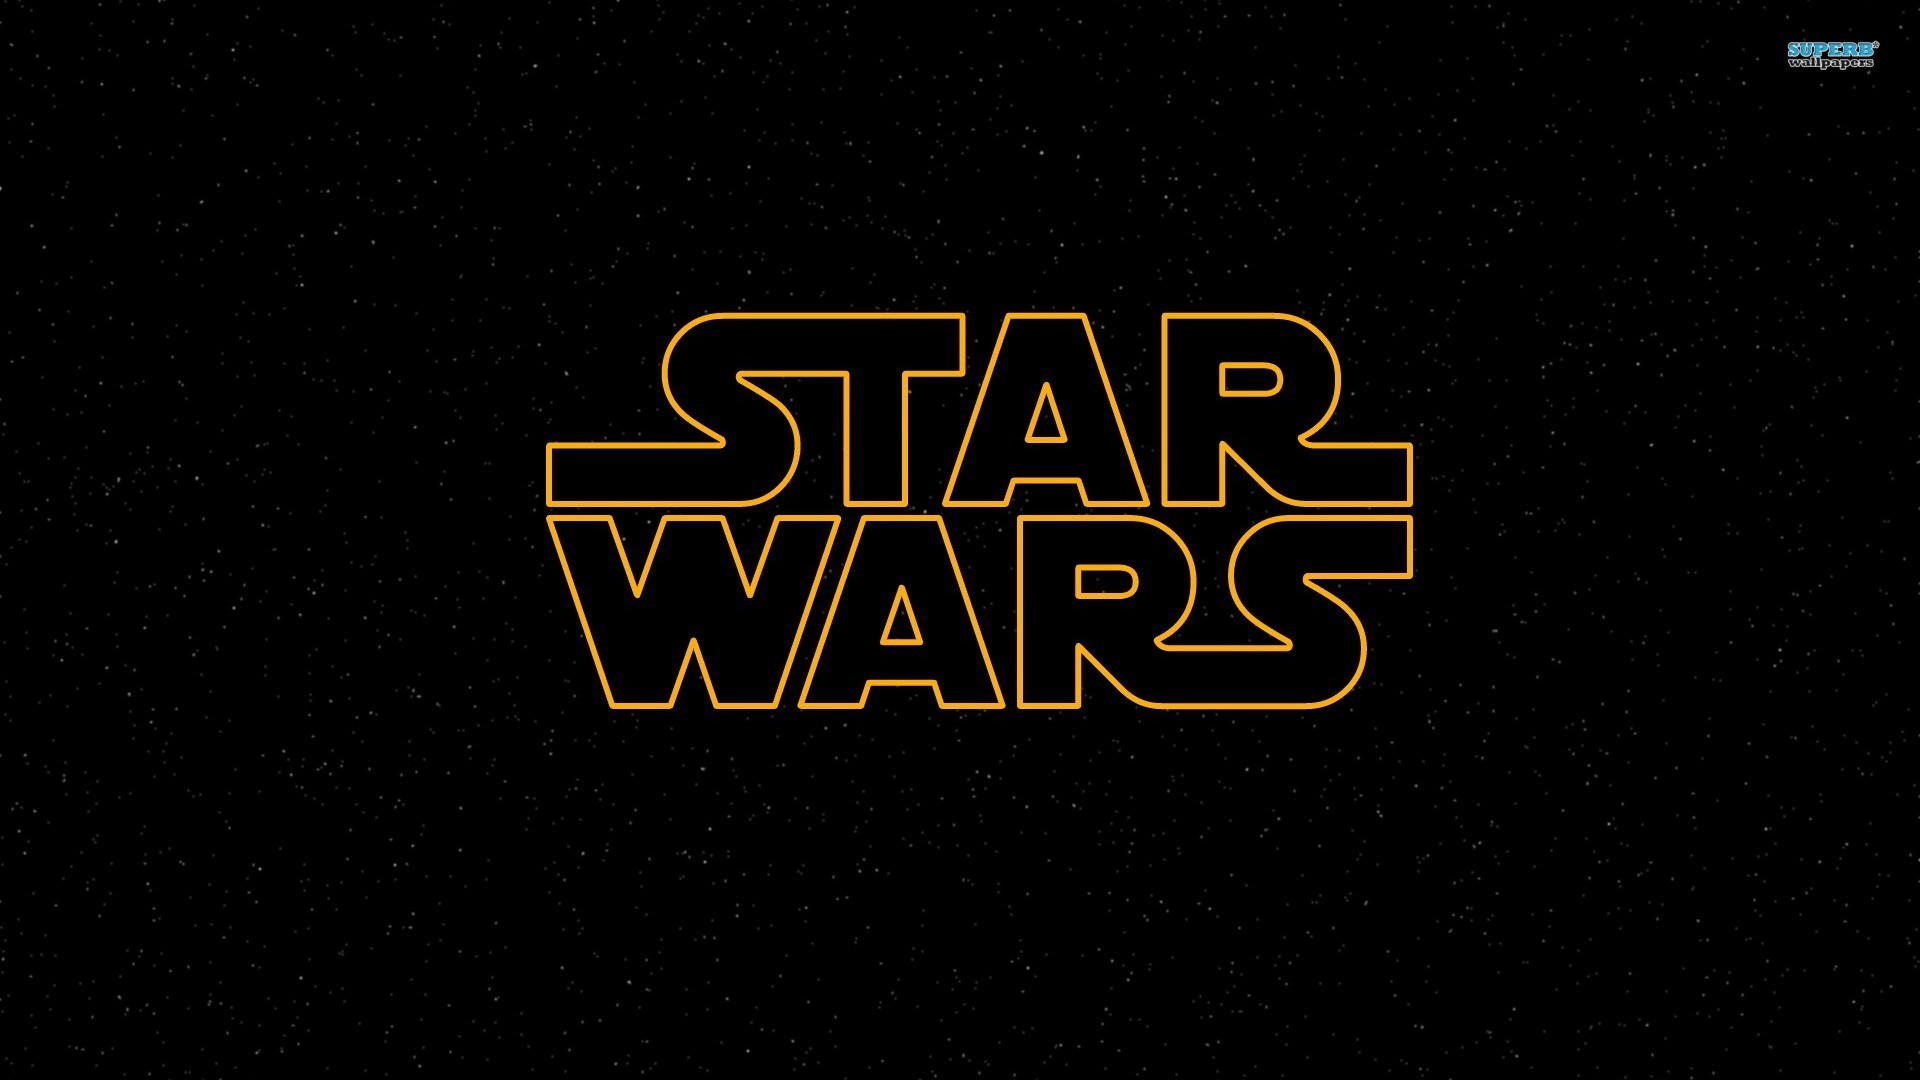 General 1920x1080 Star Wars movies logo science fiction